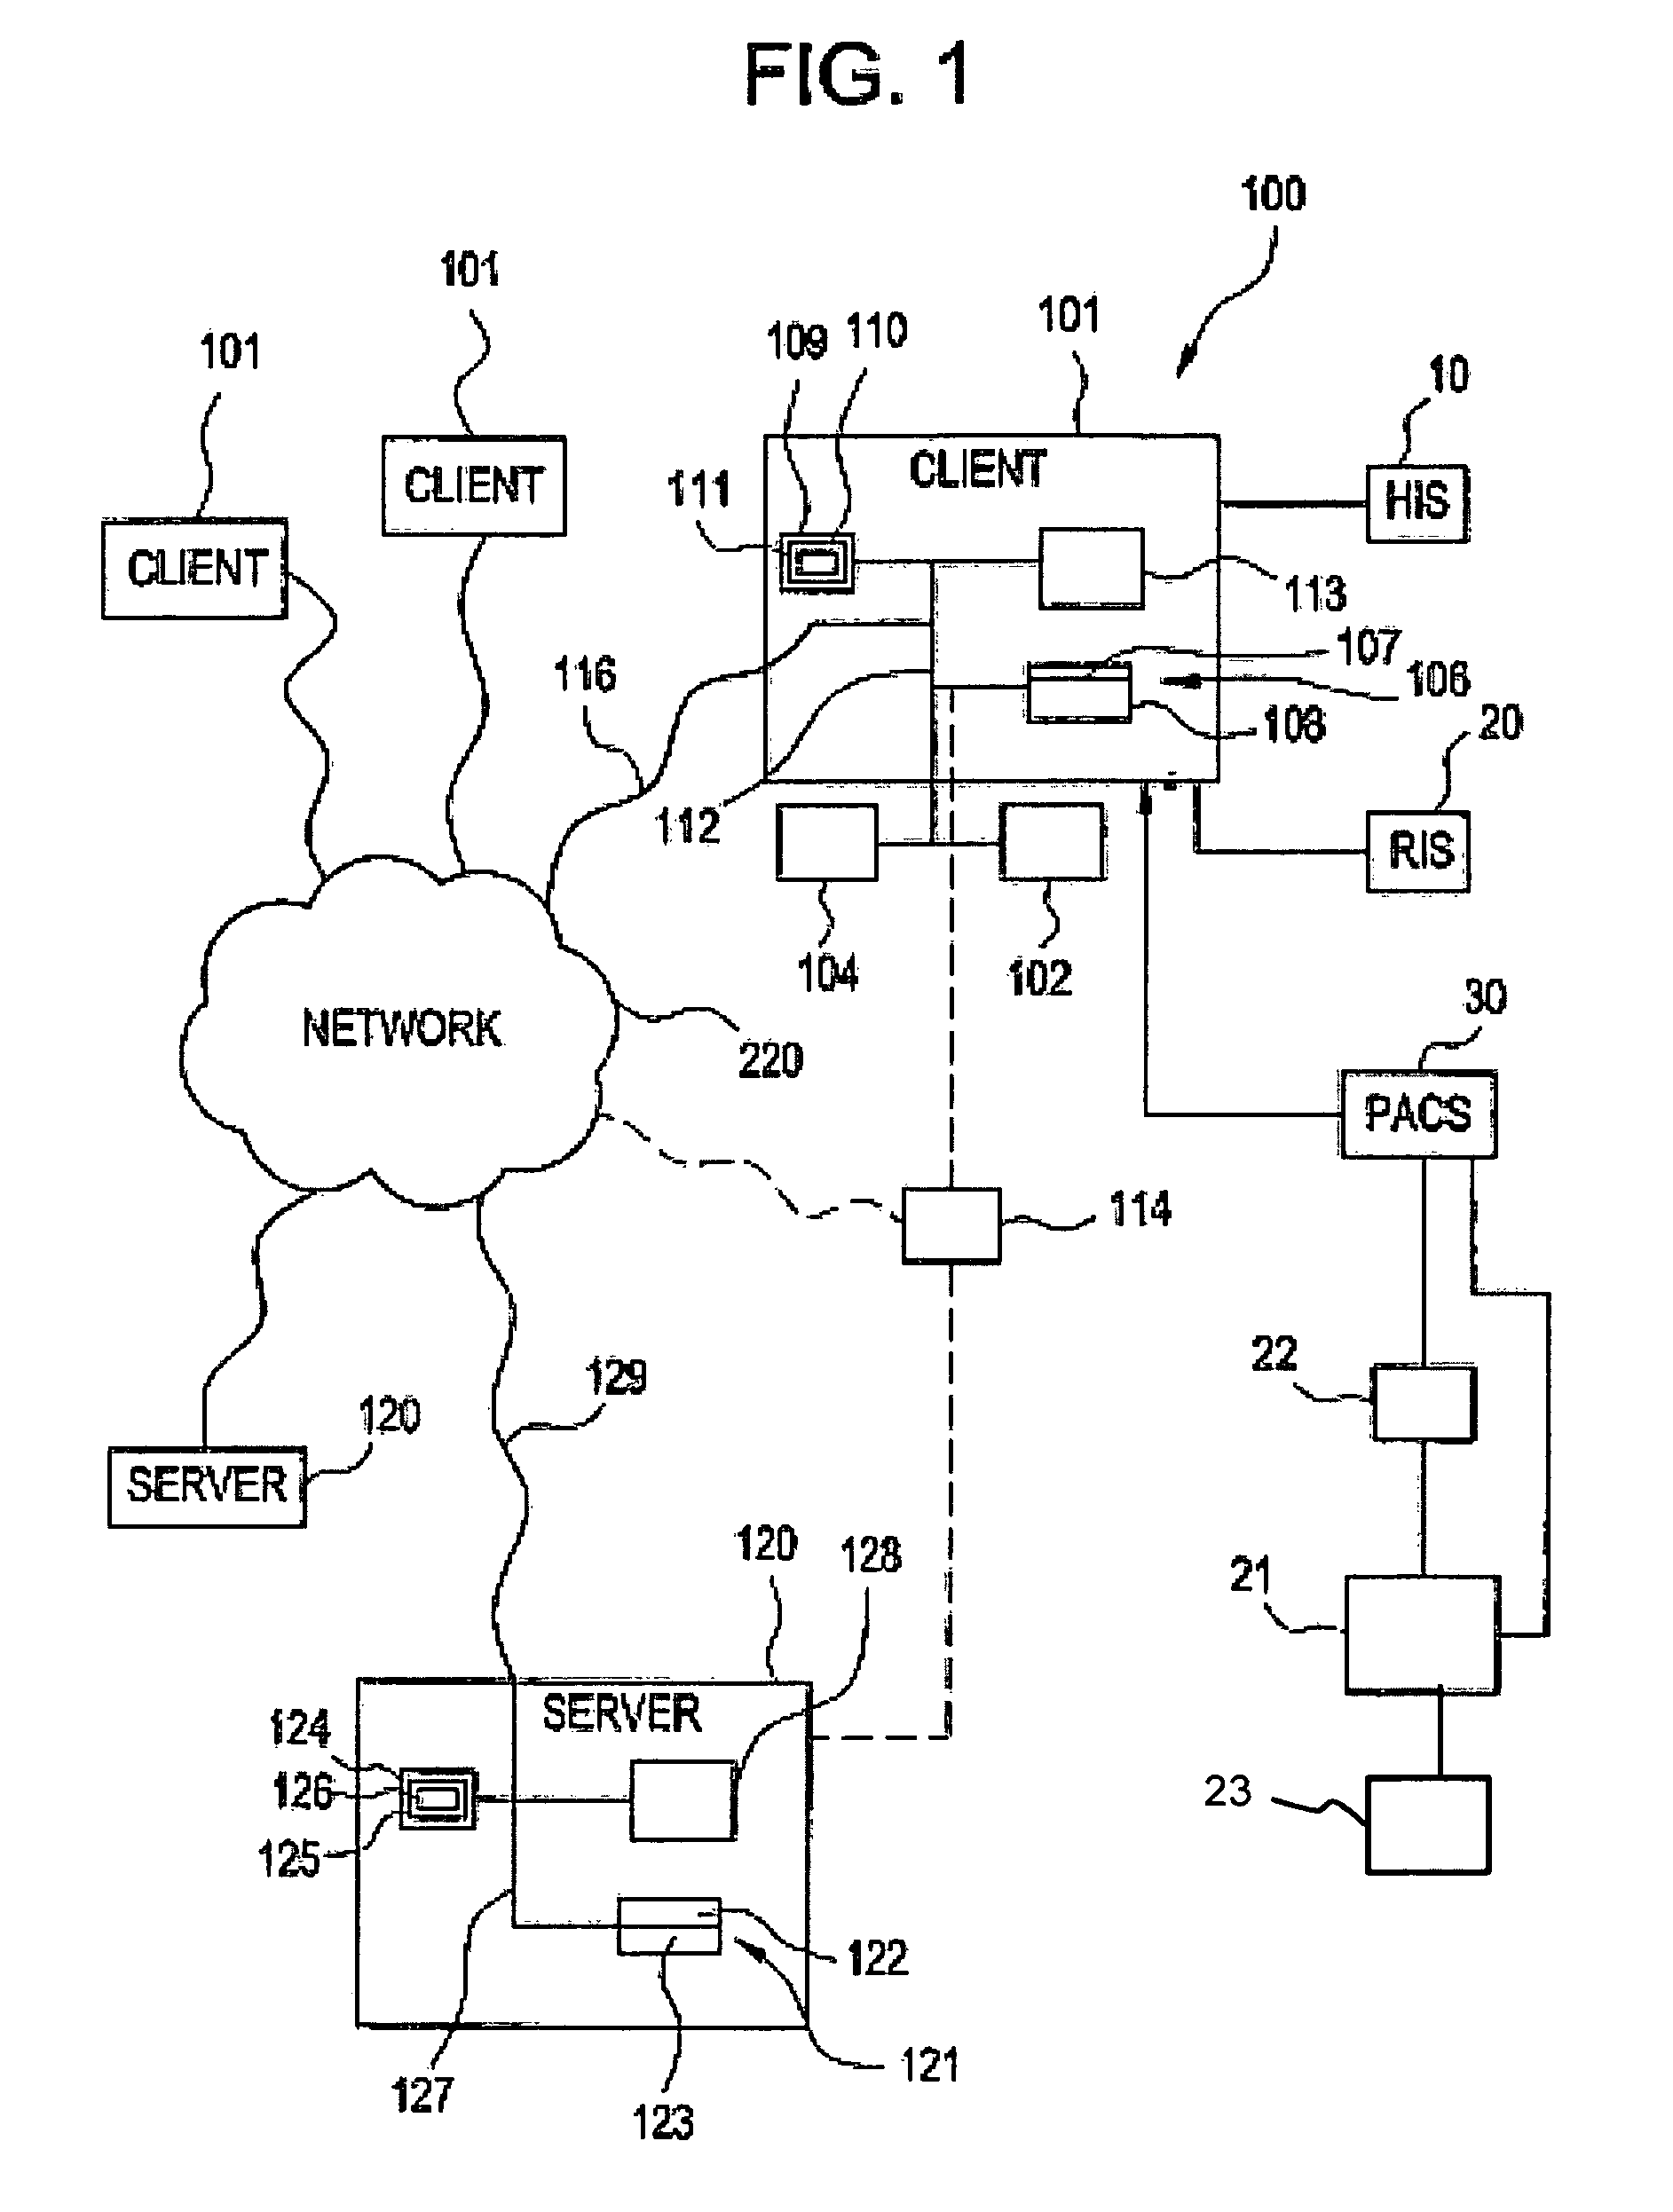 Method and apparatus of determining a radiation dose quality index in medical imaging